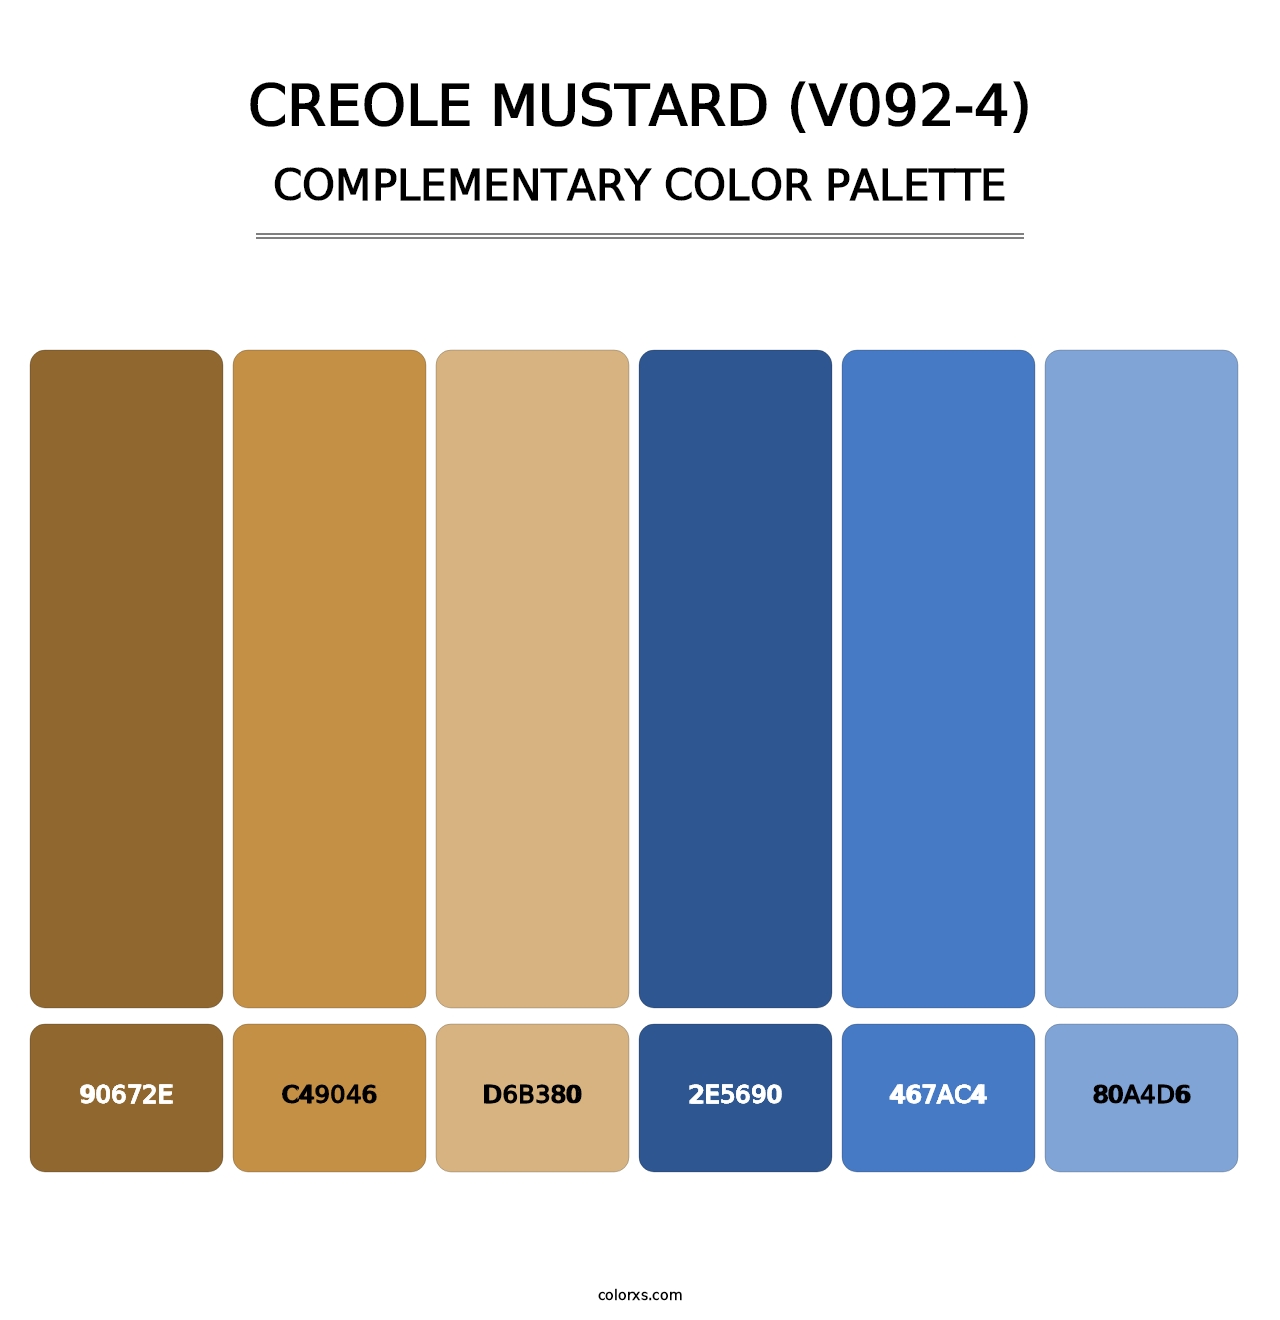 Creole Mustard (V092-4) - Complementary Color Palette